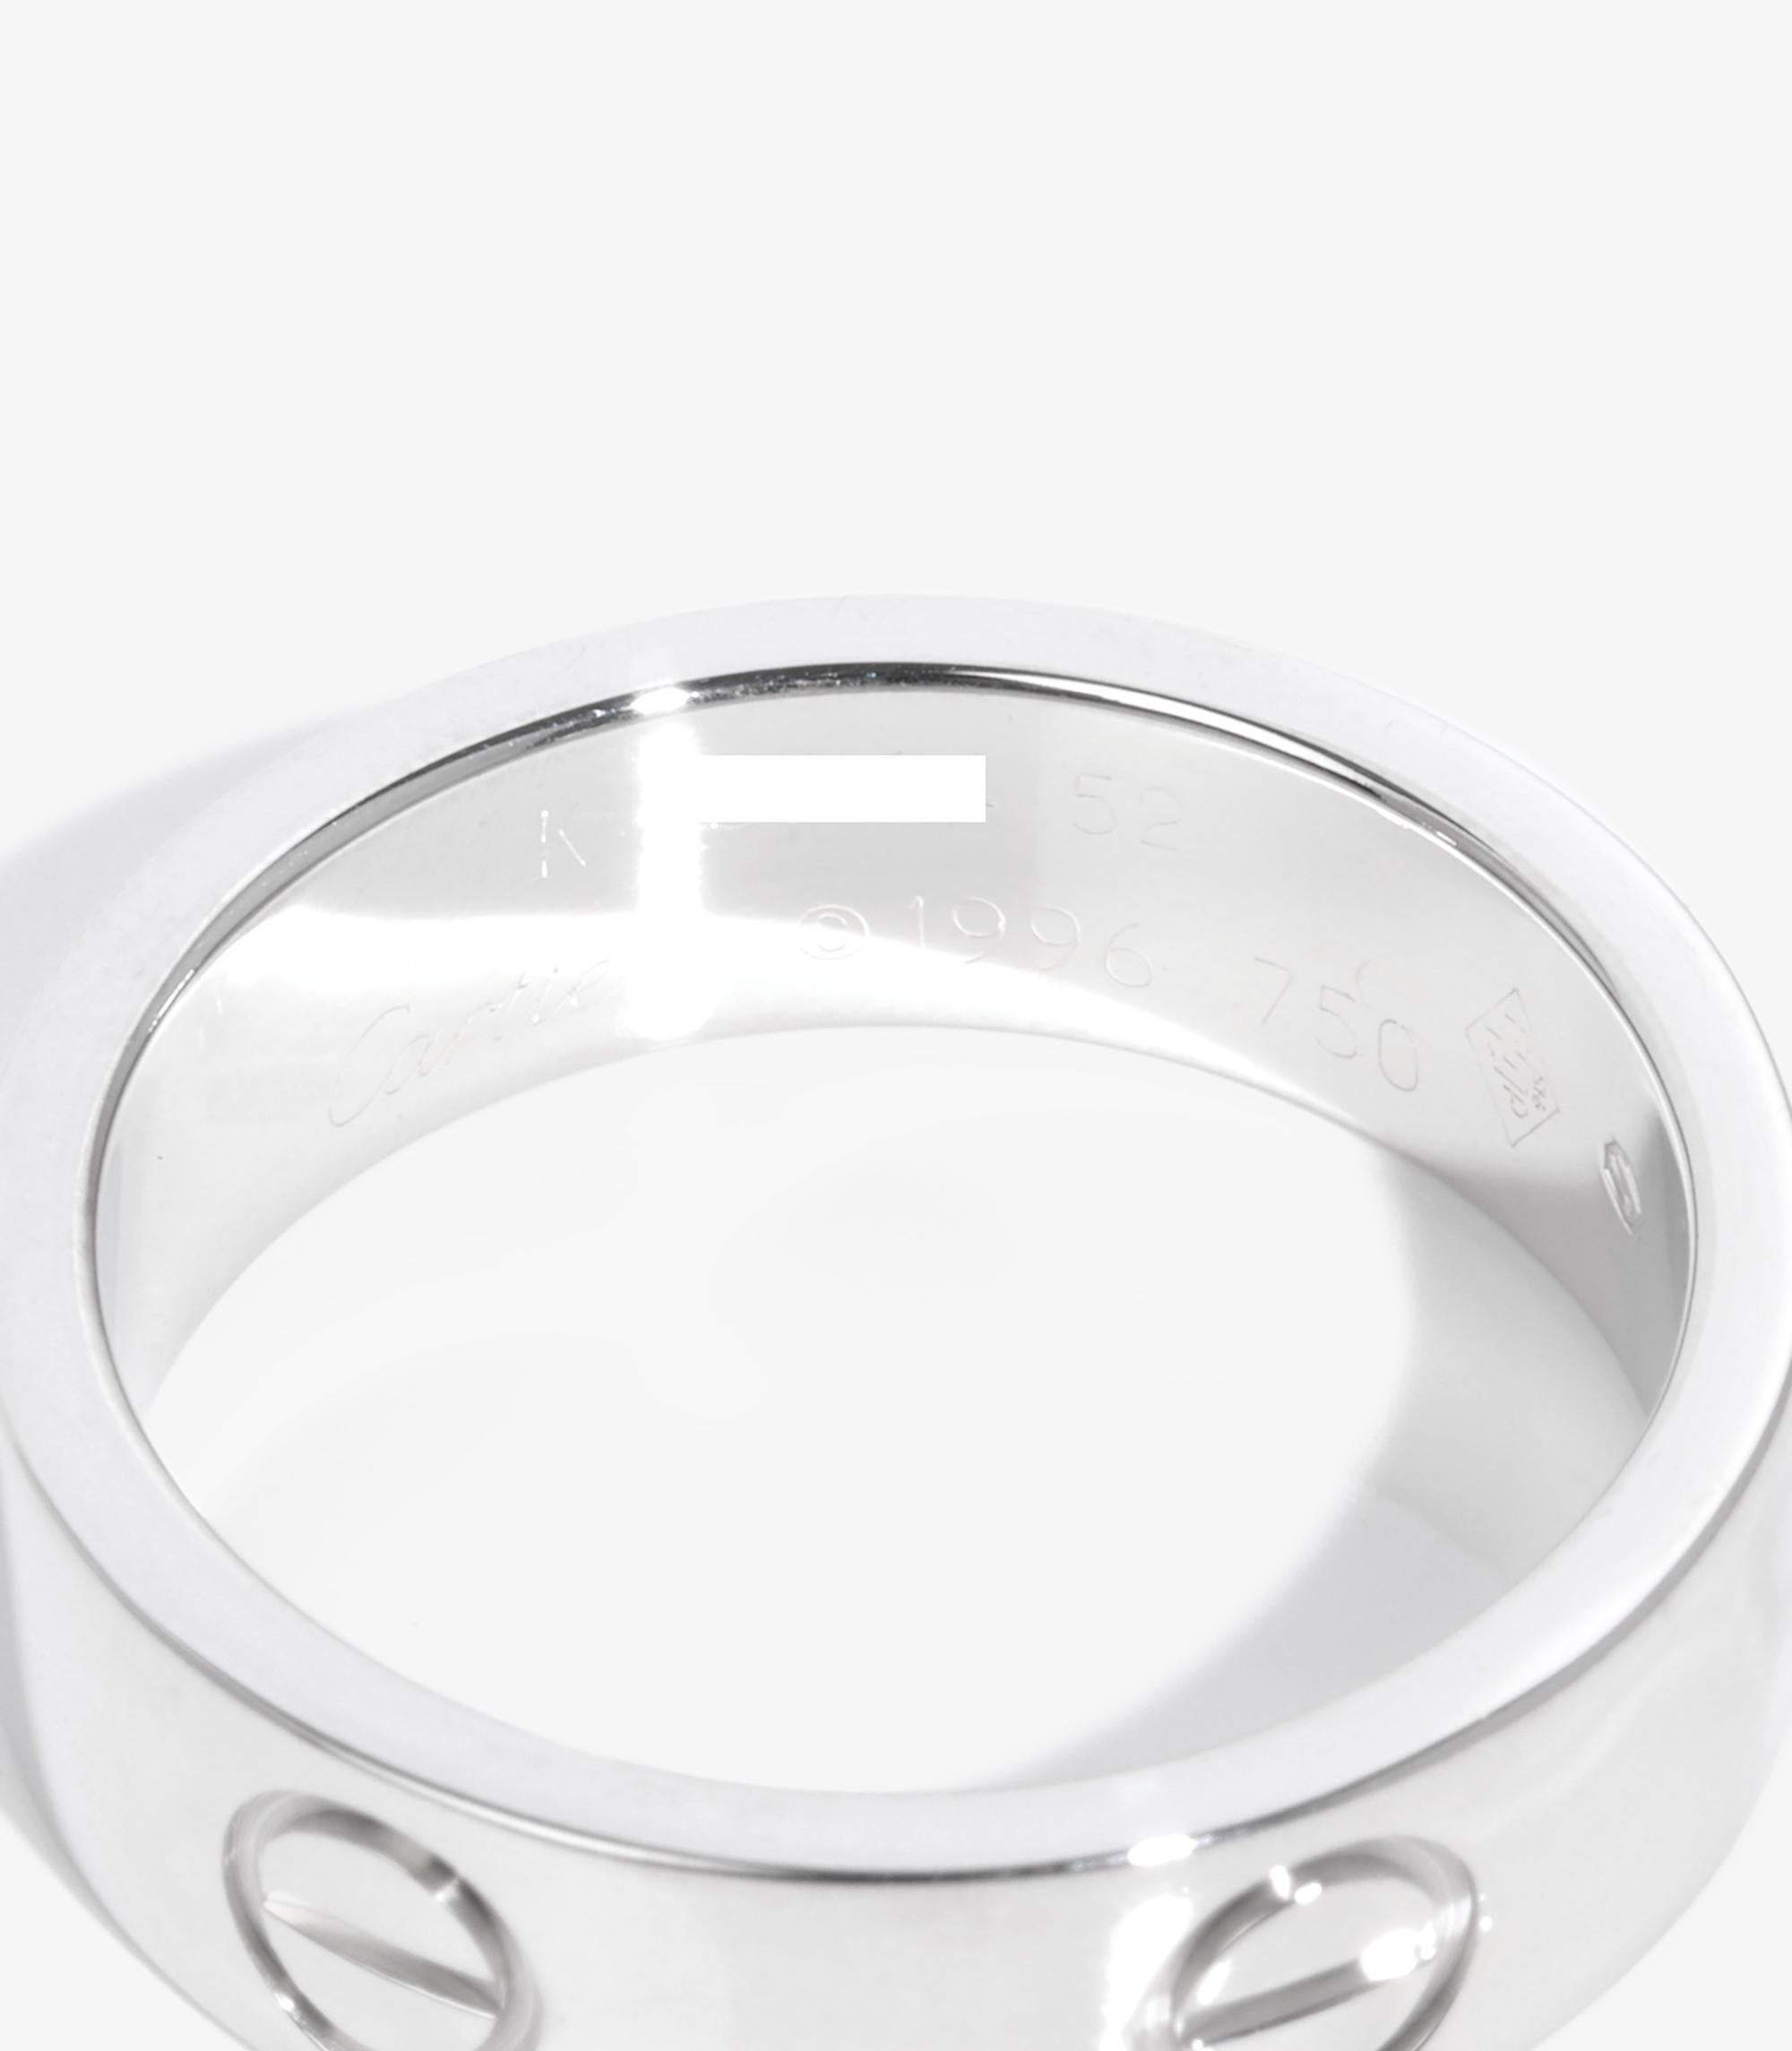 Women's or Men's Cartier 18ct White Gold Love Band Ring